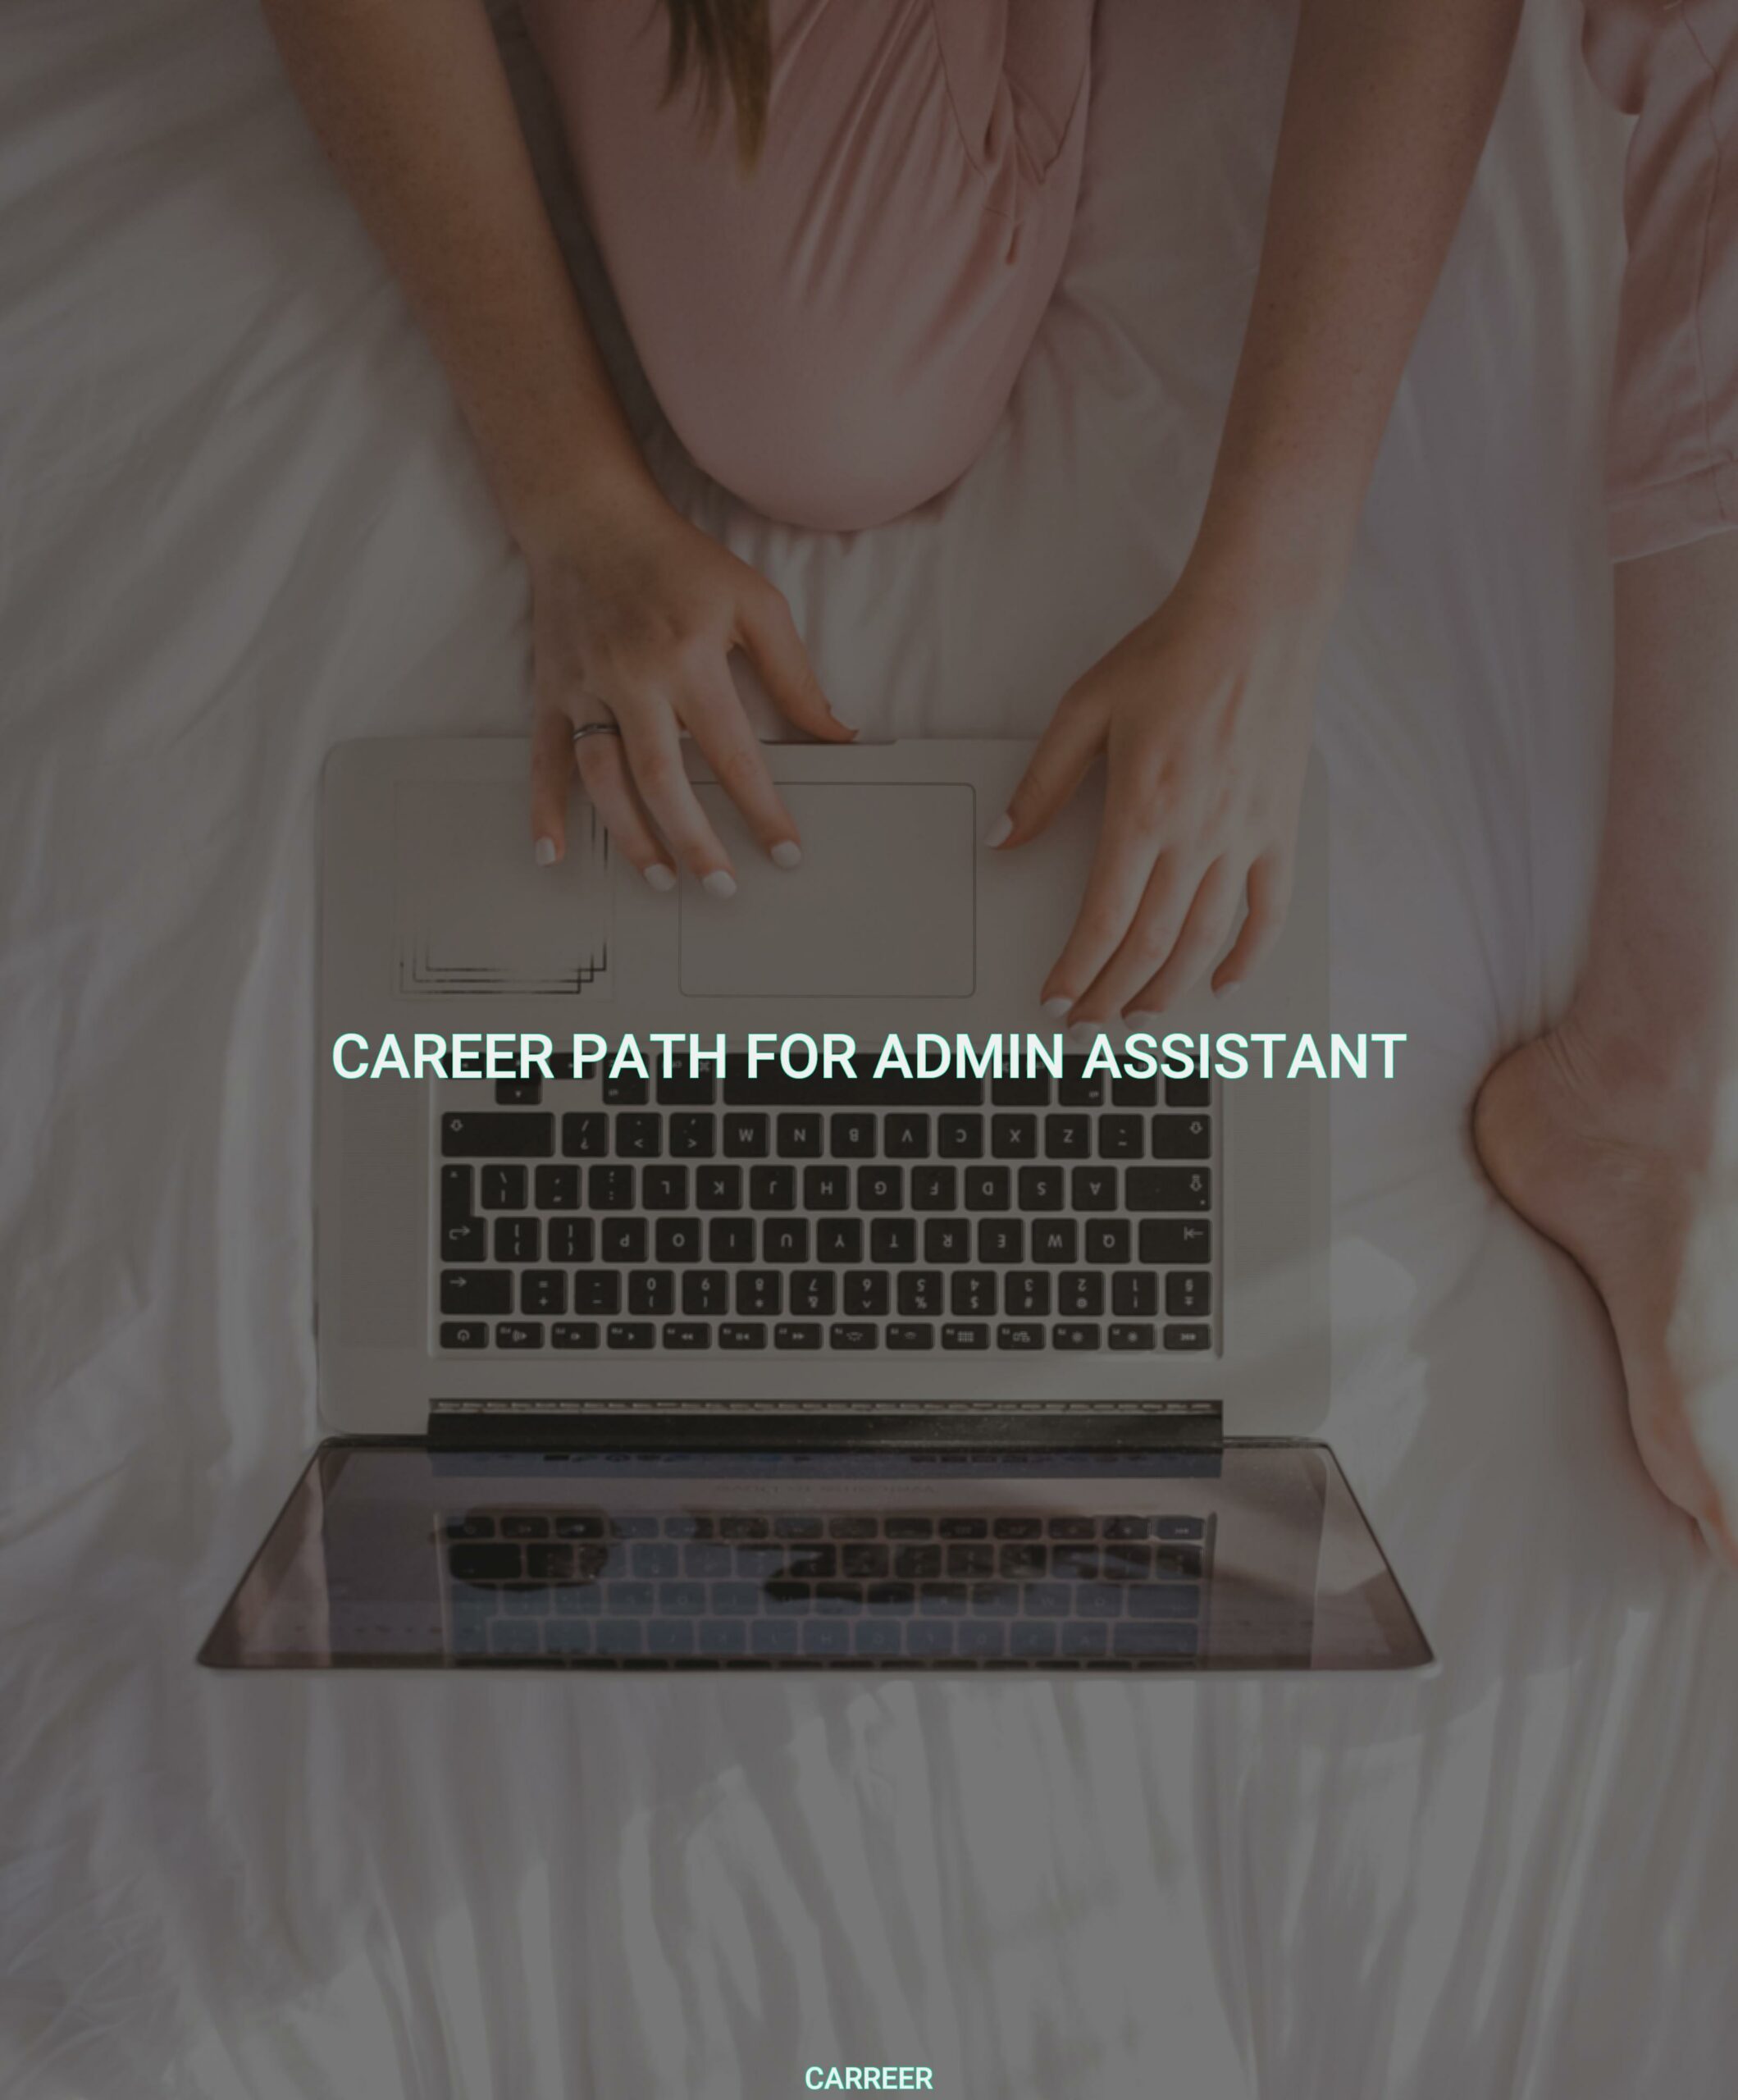 Career path for admin assistant